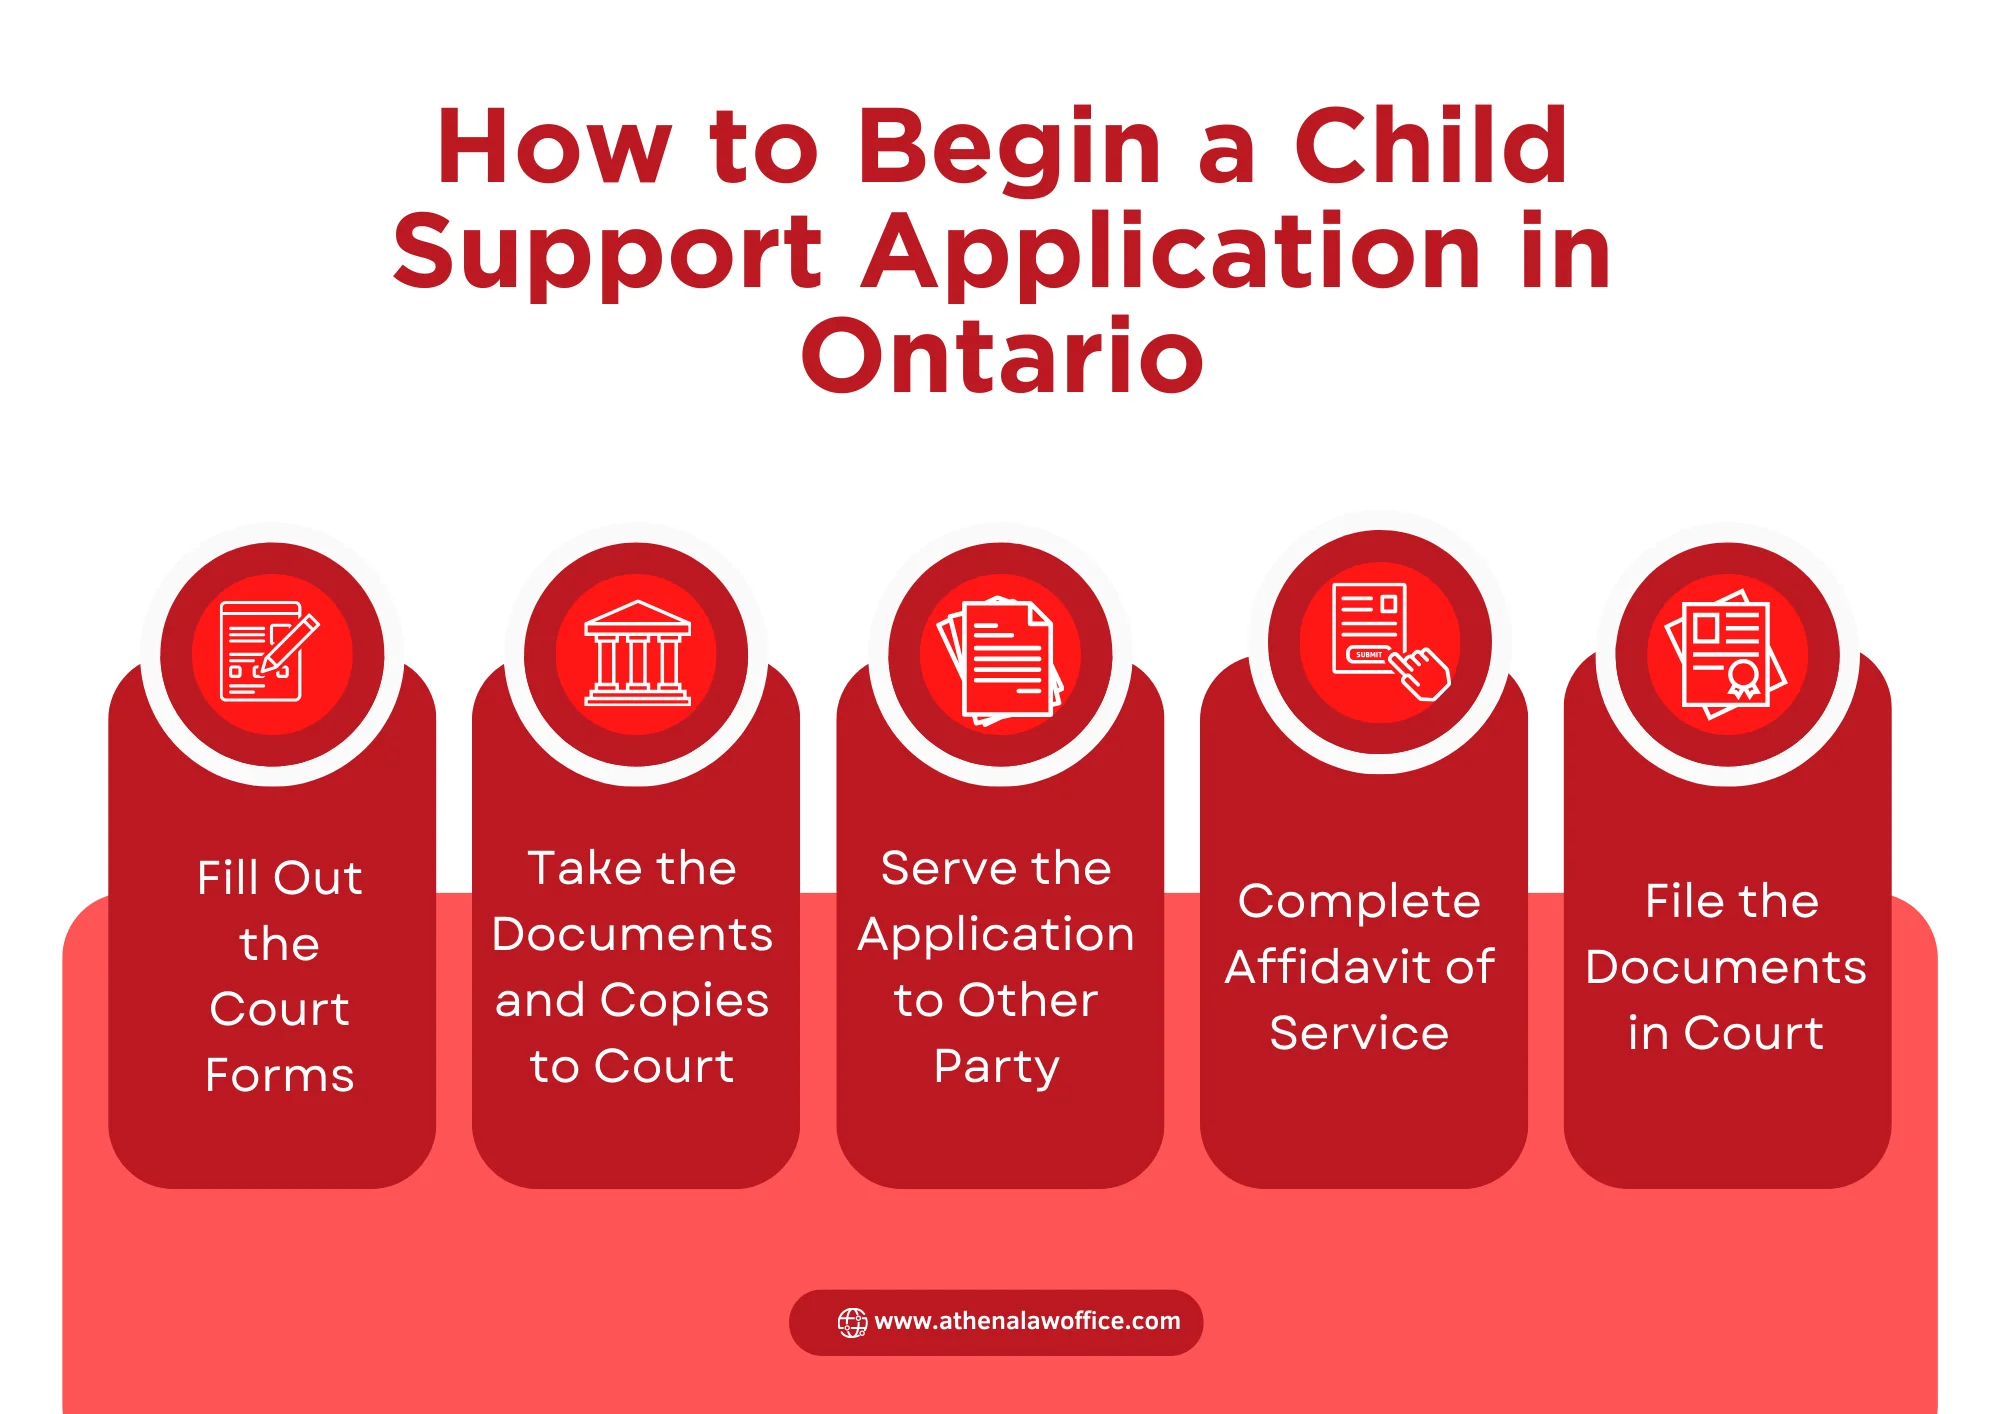 Five steps explaining how to begin child support application in Ontario